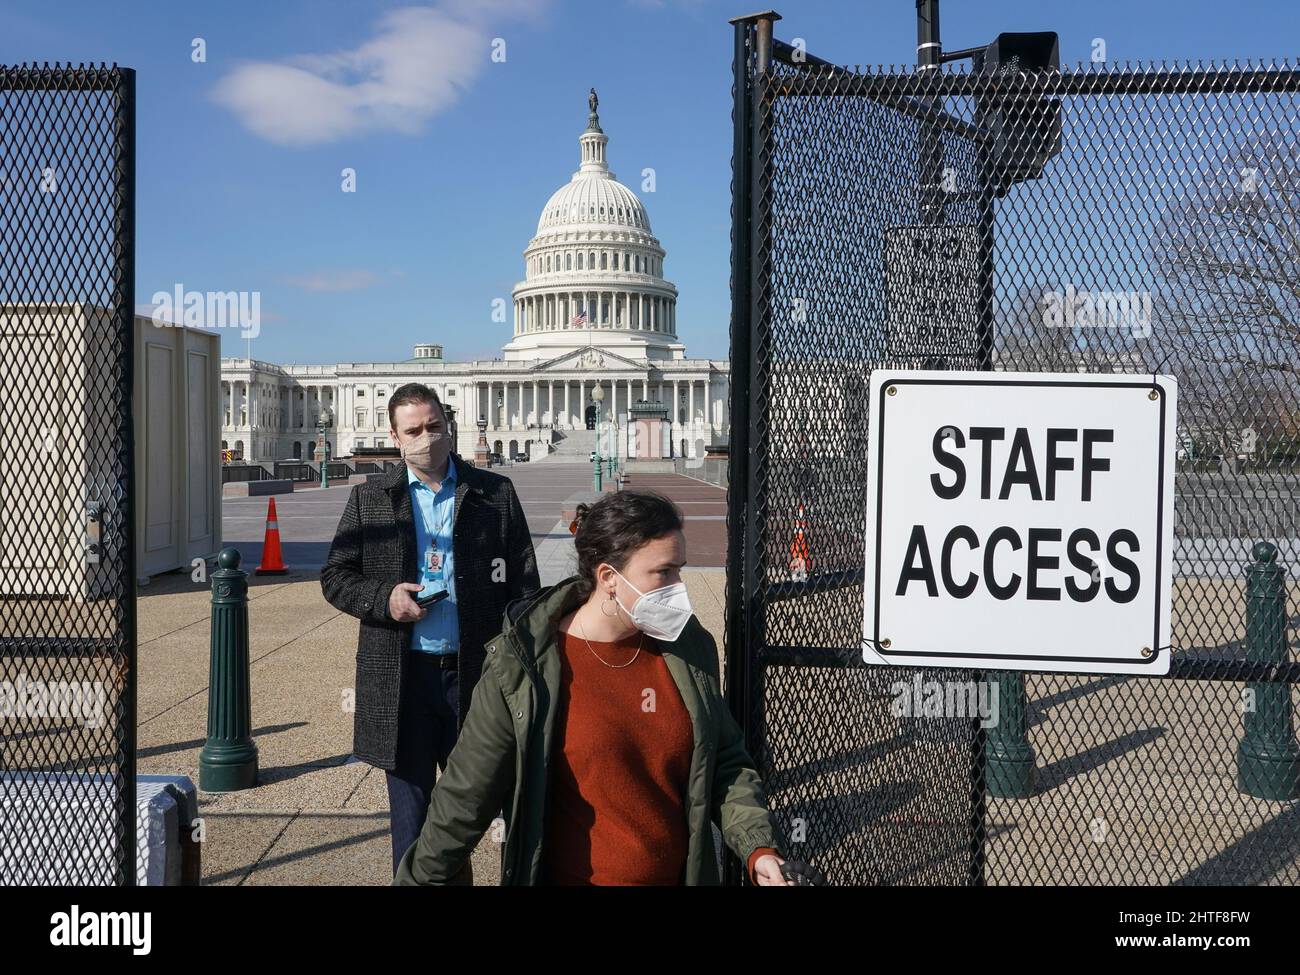 Washington, United States. 28th Feb, 2022. Congressional staff walk through an exit in the fencing around the US Capitol Building in Washington DC on Monday, February 28, 2022. The fencing was erected by the US Capitol Police once before following the January 6, 2021 riots and was reinstalled this year prior to the March 1, 2022 State of The Union address by President Biden and the arrival of a trucker caravan coming to Washington DC to protest COVID restrictions. Photo by Jemal Countess/UPI Credit: UPI/Alamy Live News Stock Photo